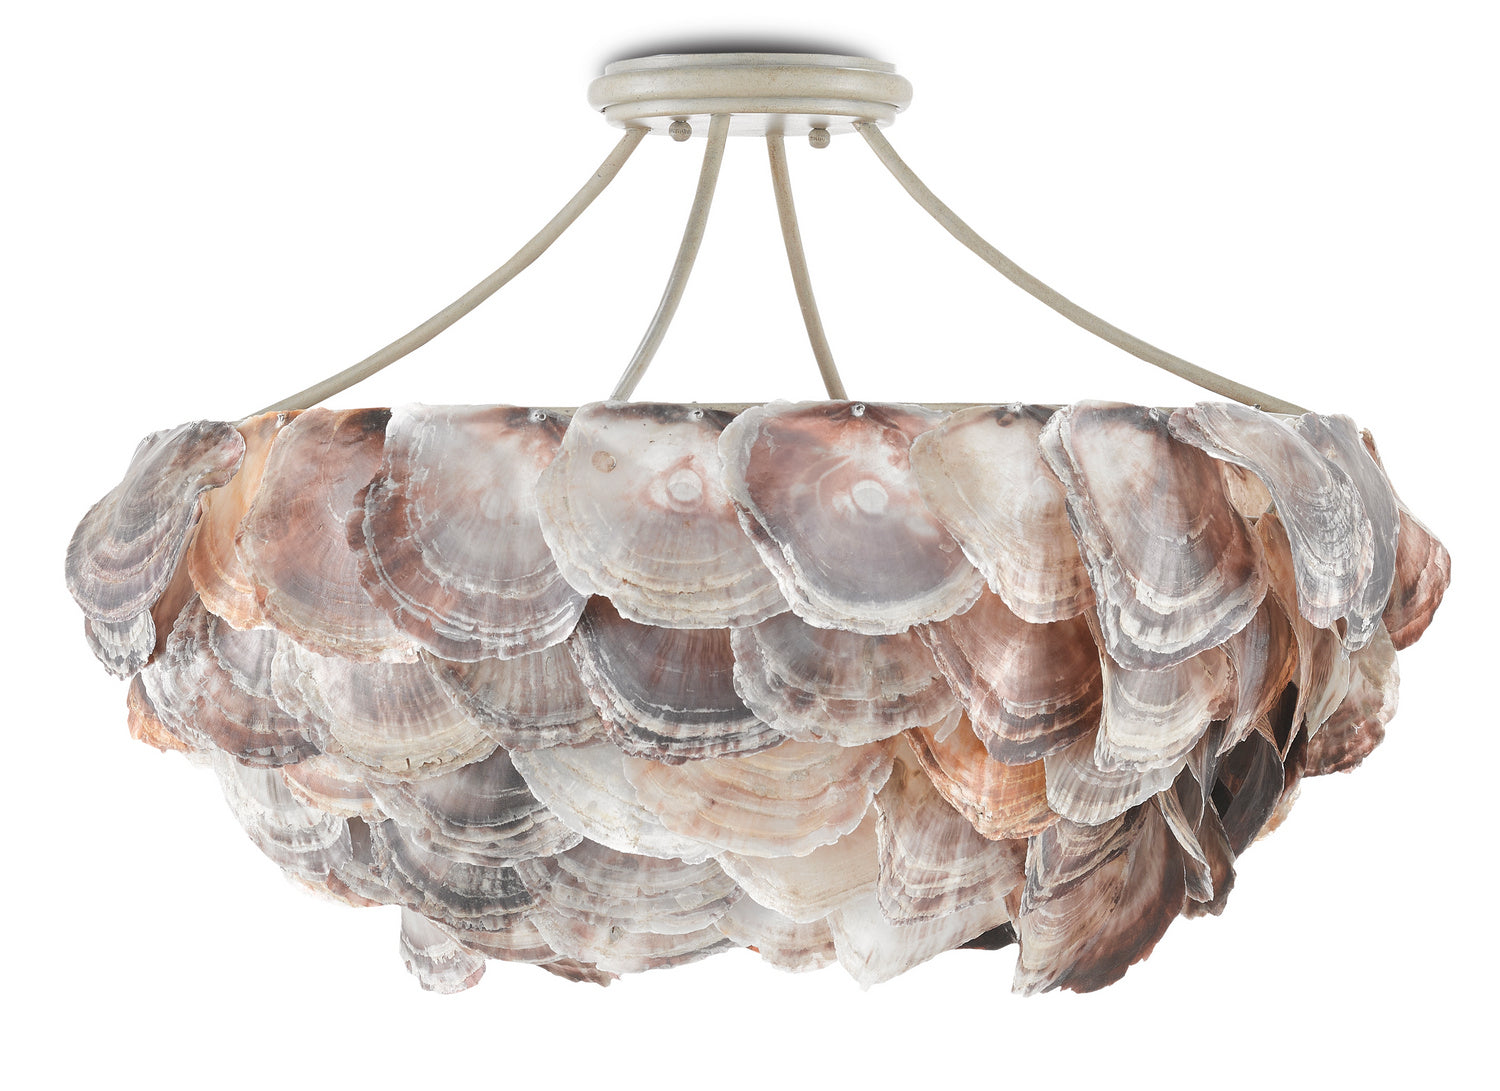 Six Light Chandelier from the Seahouse collection in Smokewood/Natural Shell finish